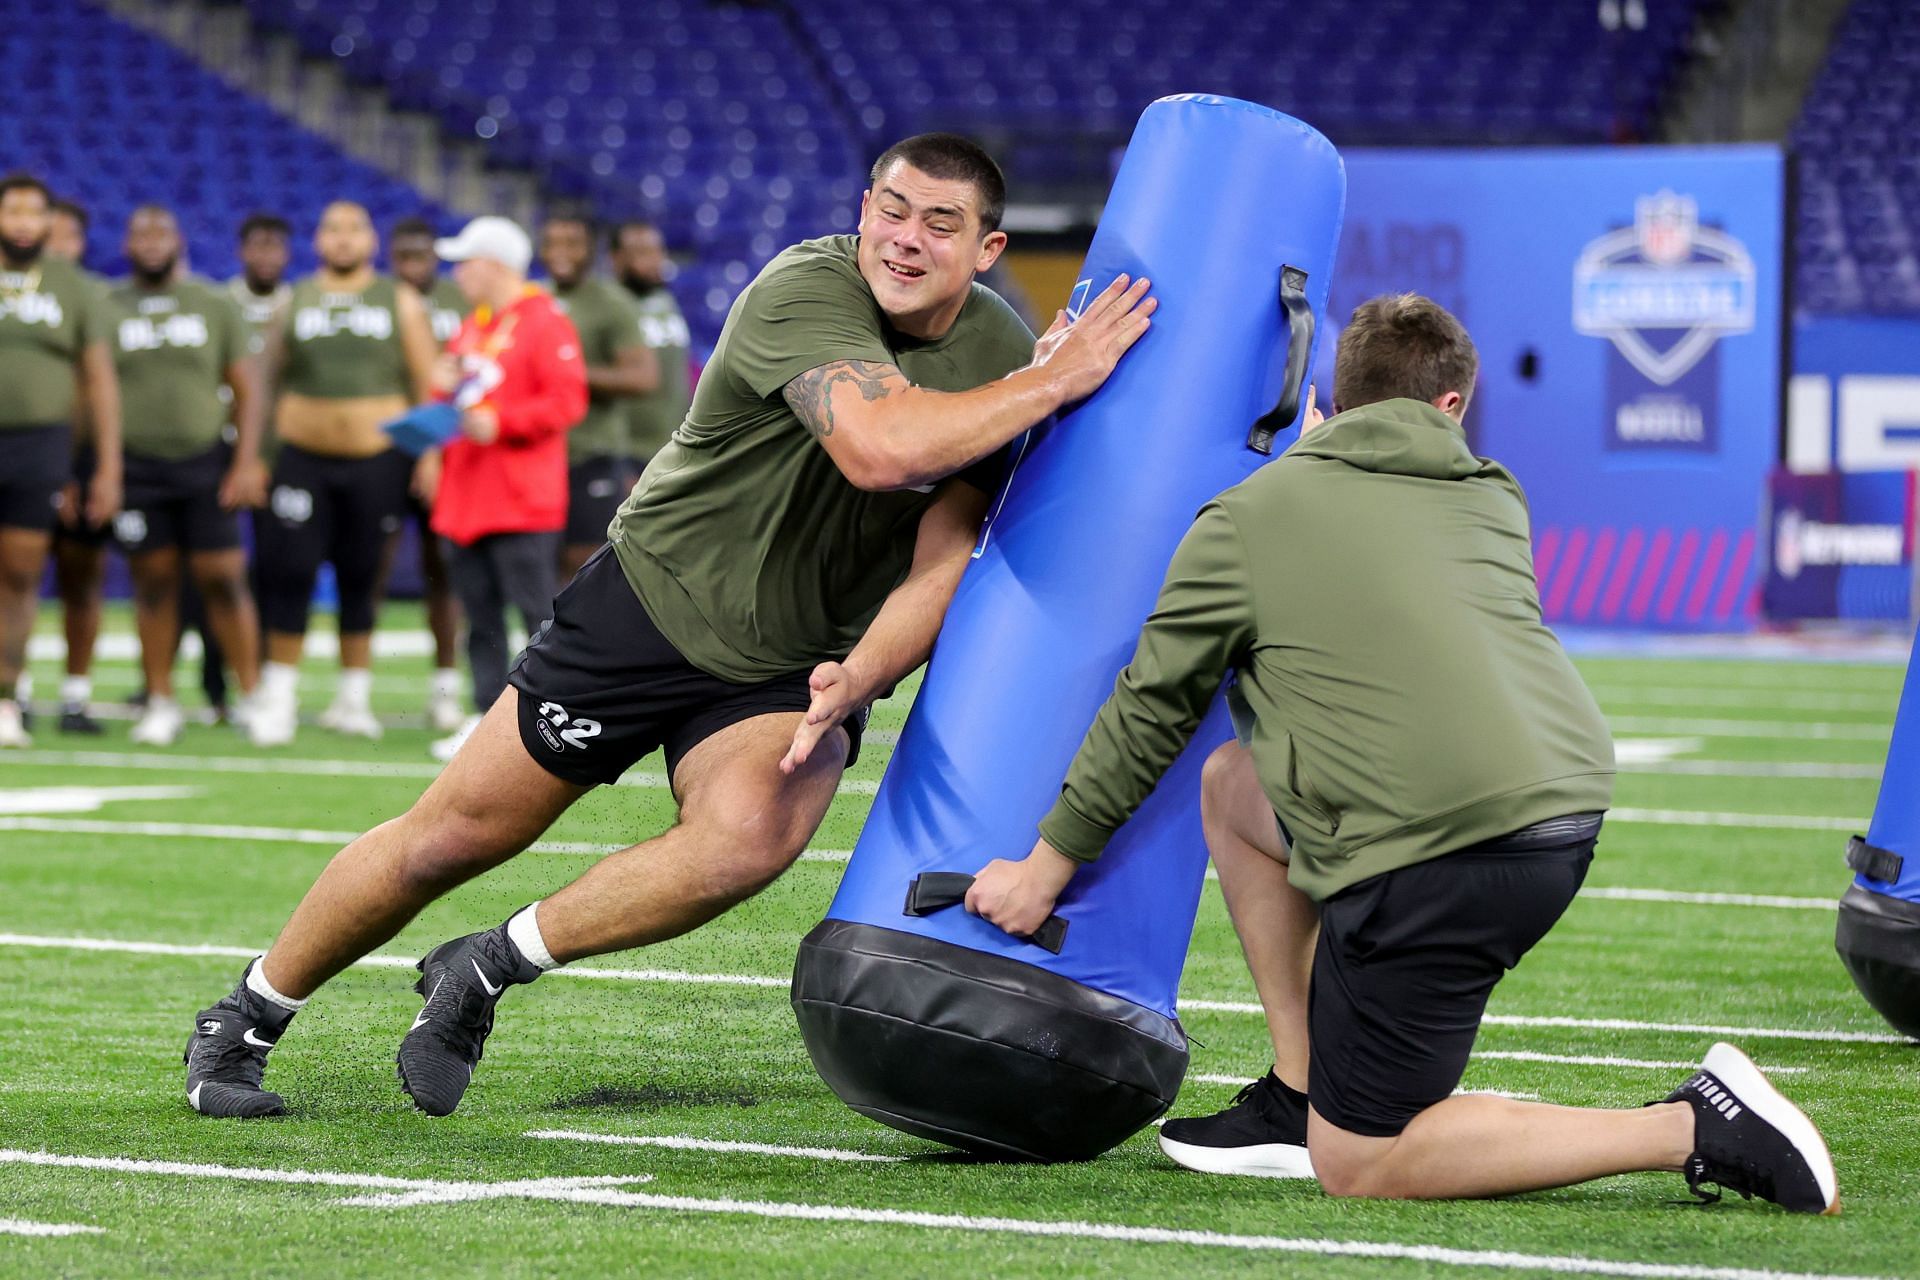 Defensive lineman Bryan Bresee of Clemson participates in a drill during the NFL Combine